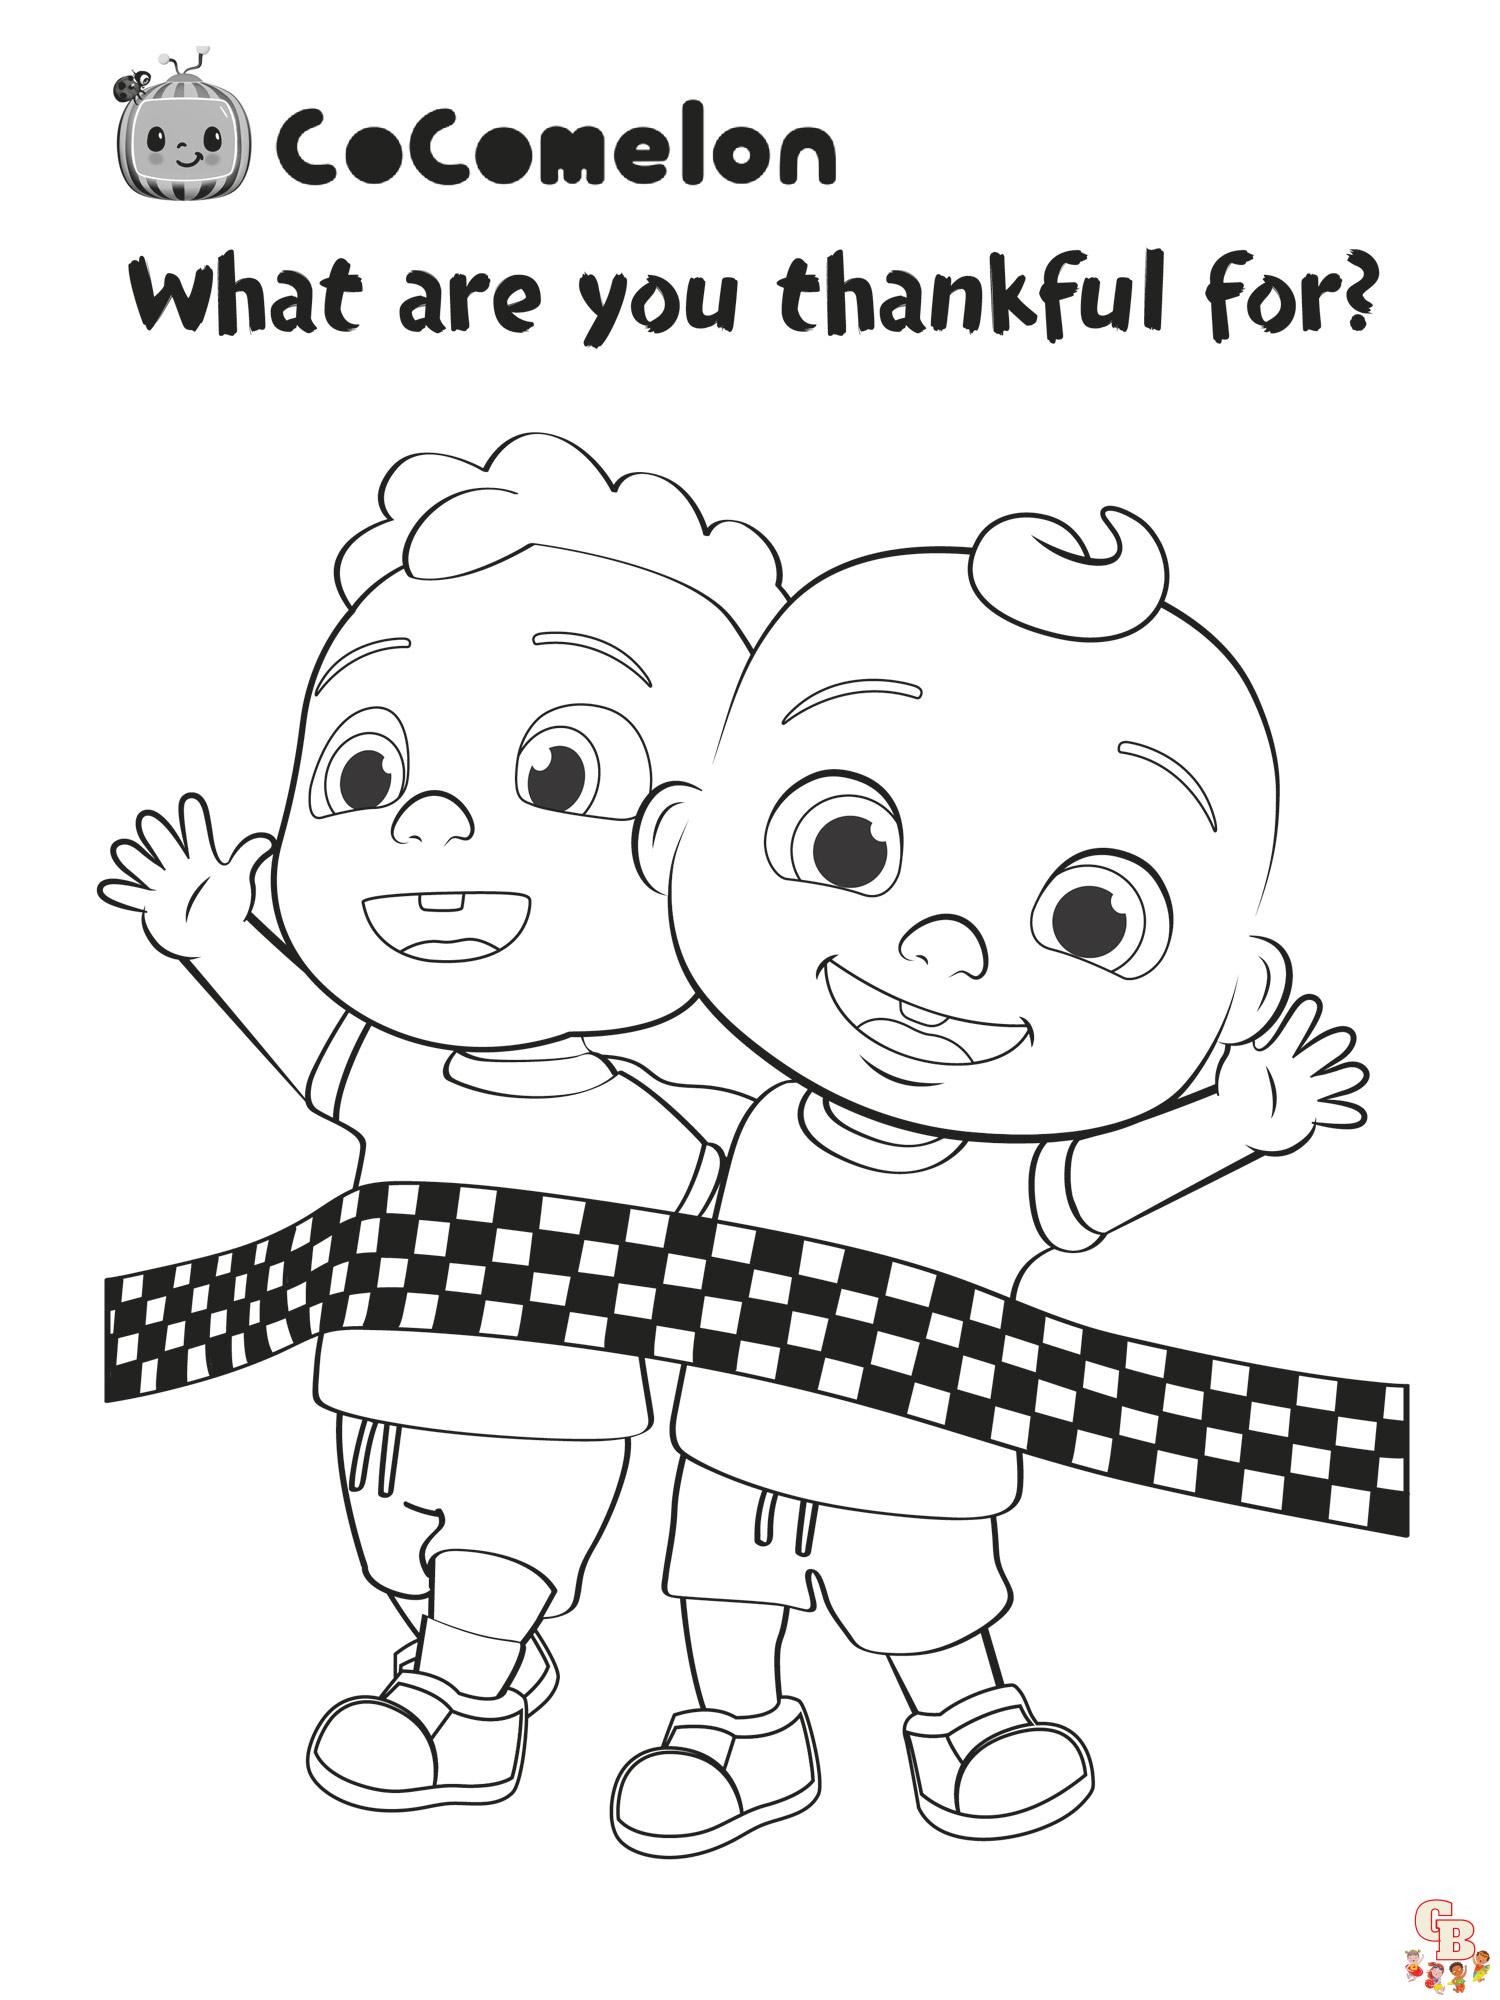 Cocomelon Coloring Pages 8